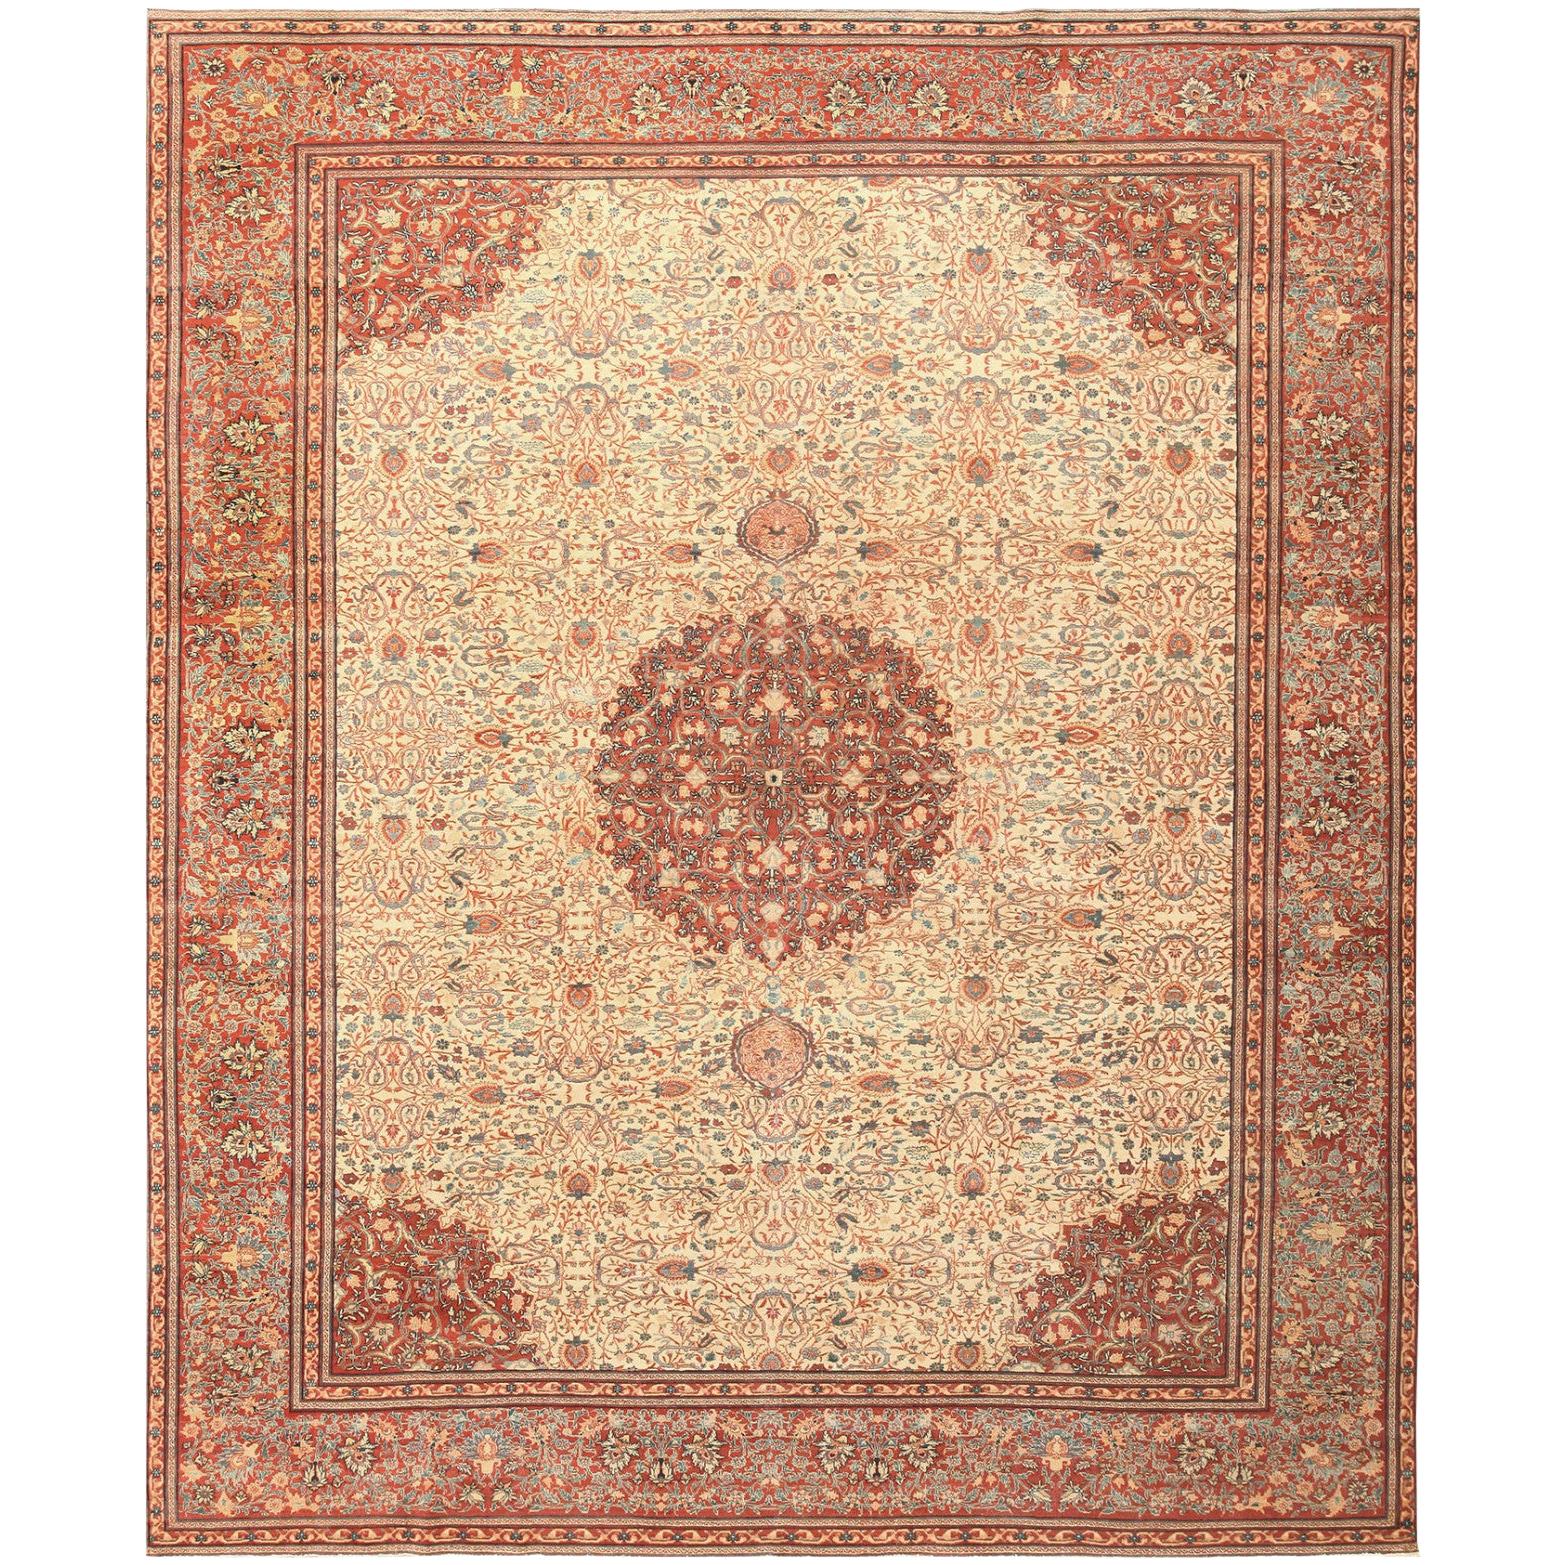 Nazmiyal Collection Antique Persian Tabriz Carpet. Size: 9 ft 6 in x 11 ft 6 in